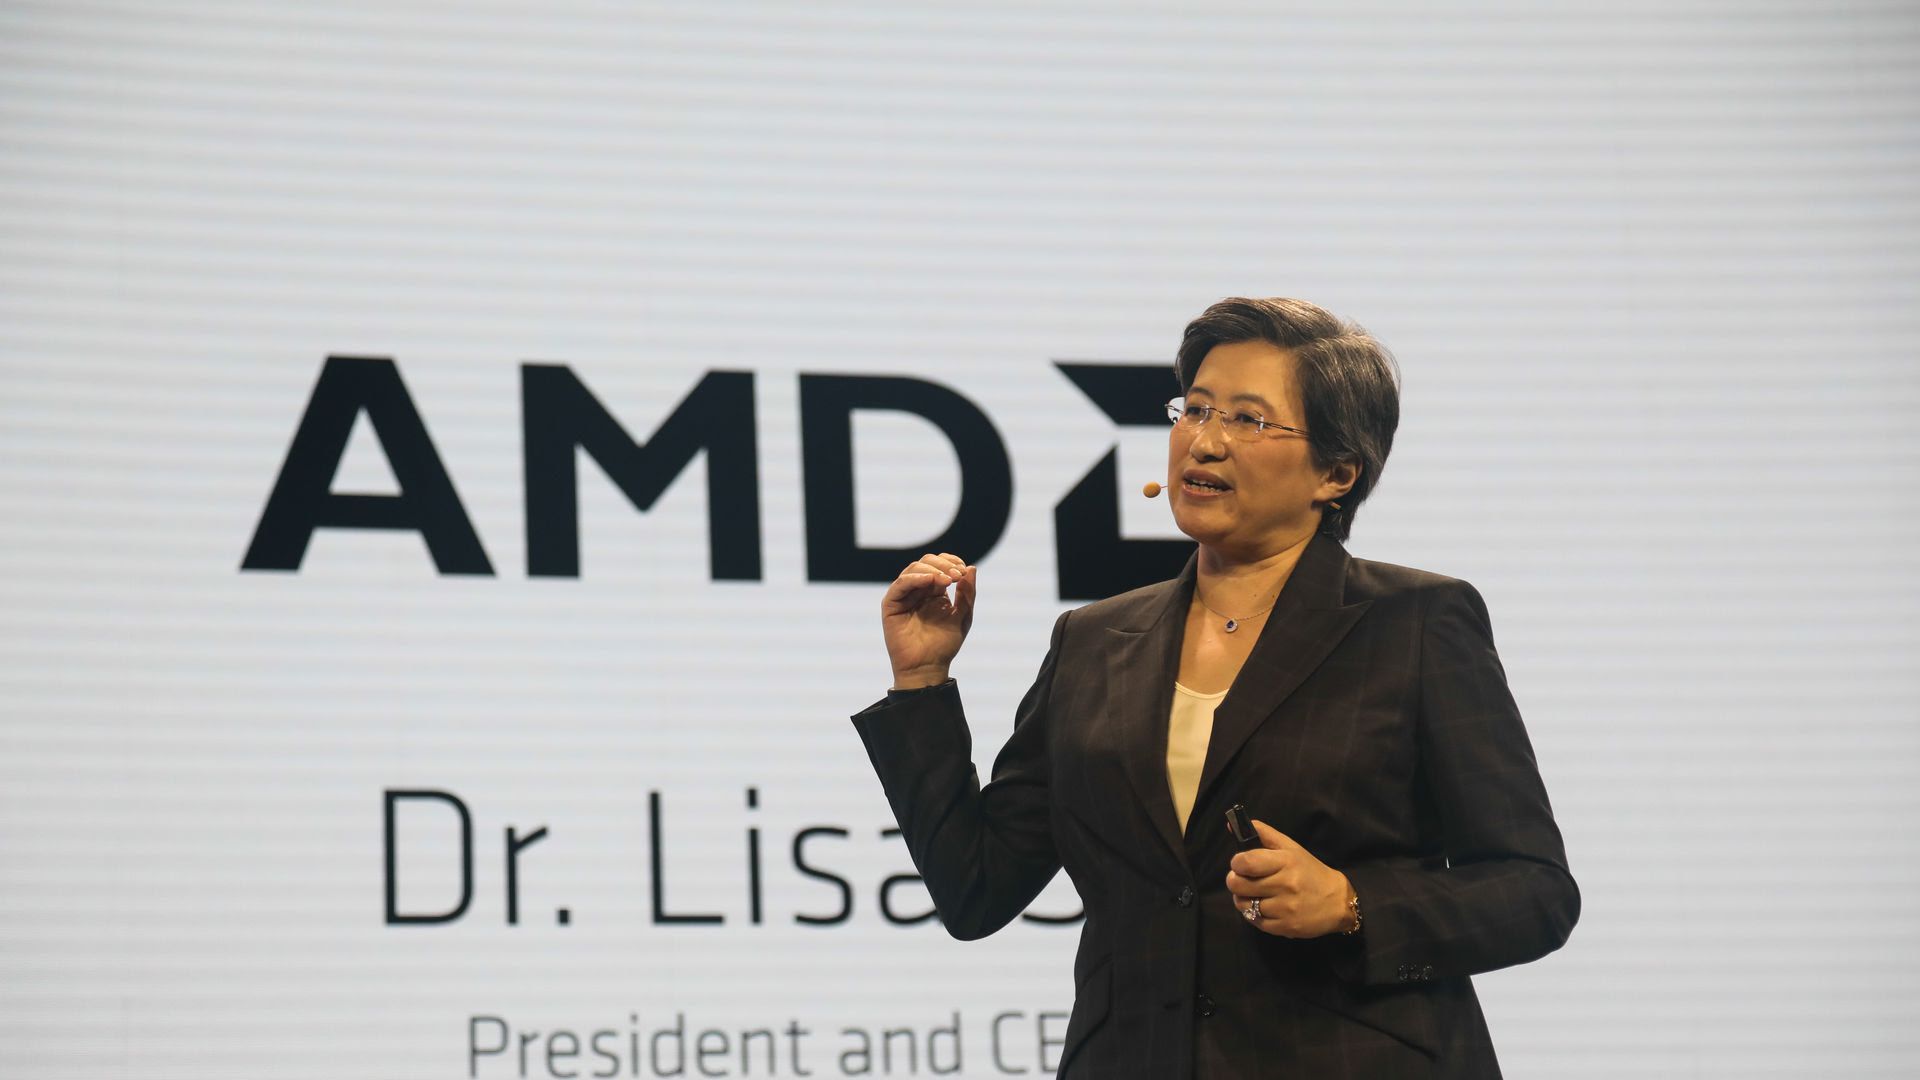 This image shows Su speaking on stage while wearing a blazer and microphone. The large screen behind her shows the AMD logo and her name.